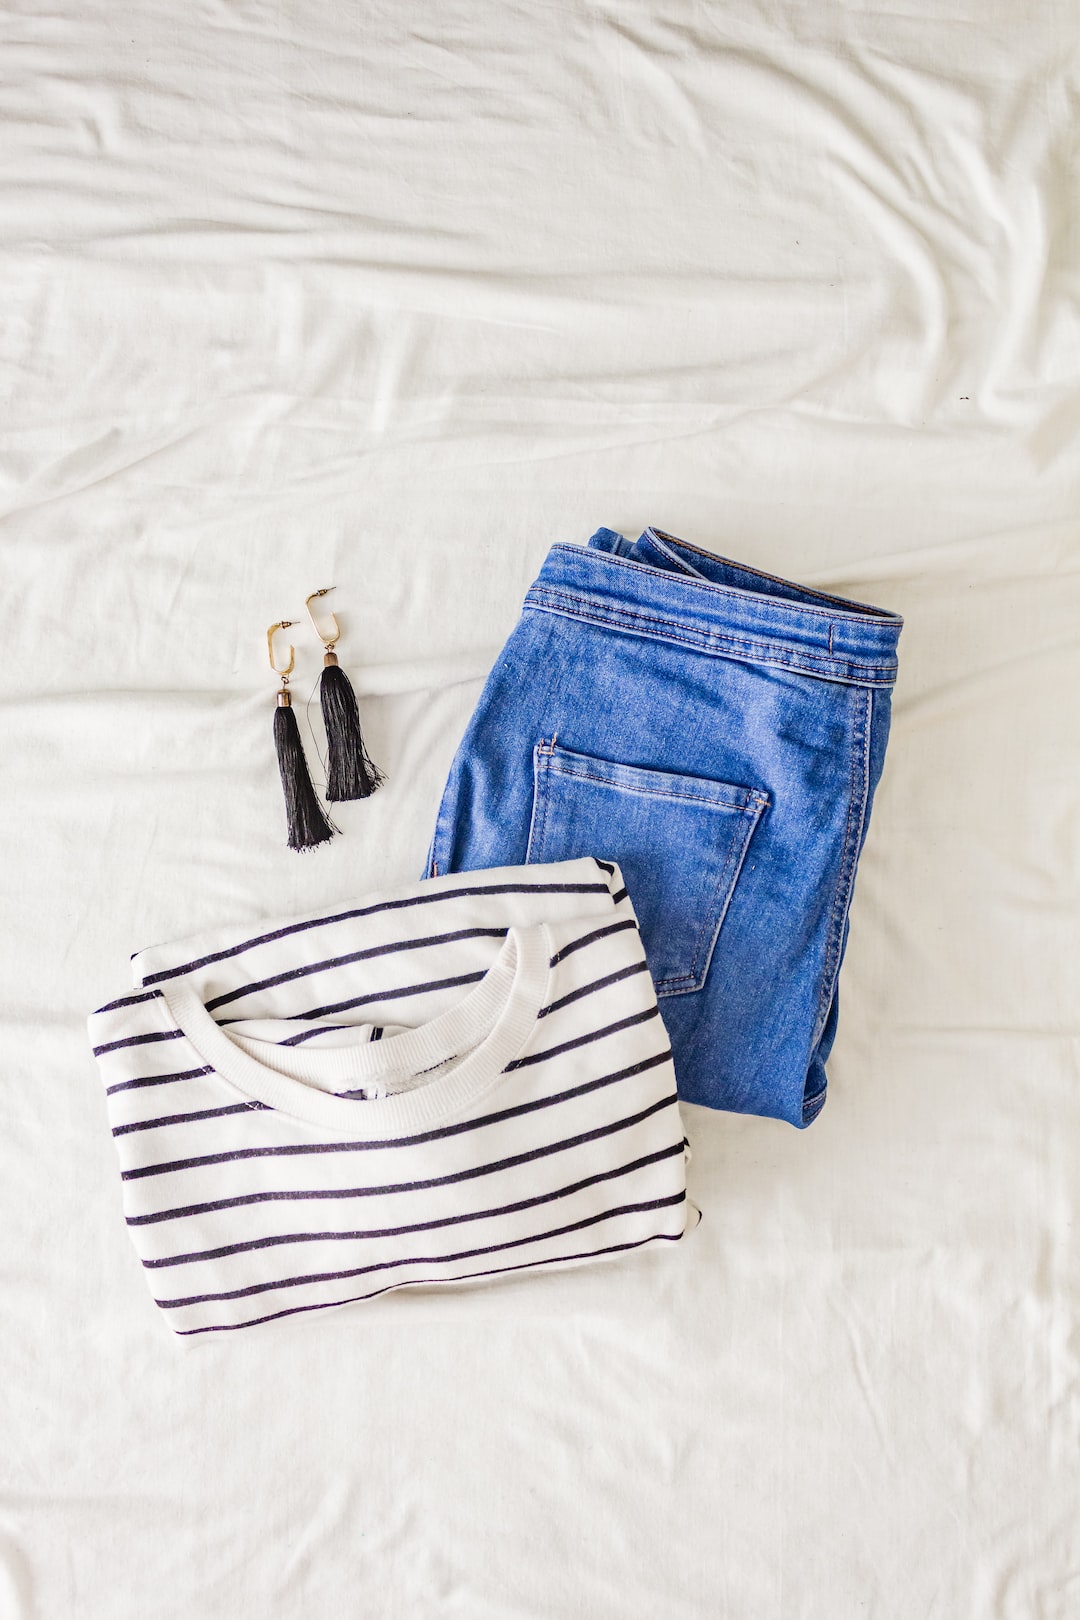 Fashion-forward travel: outfit ideas for every destination – Info ...